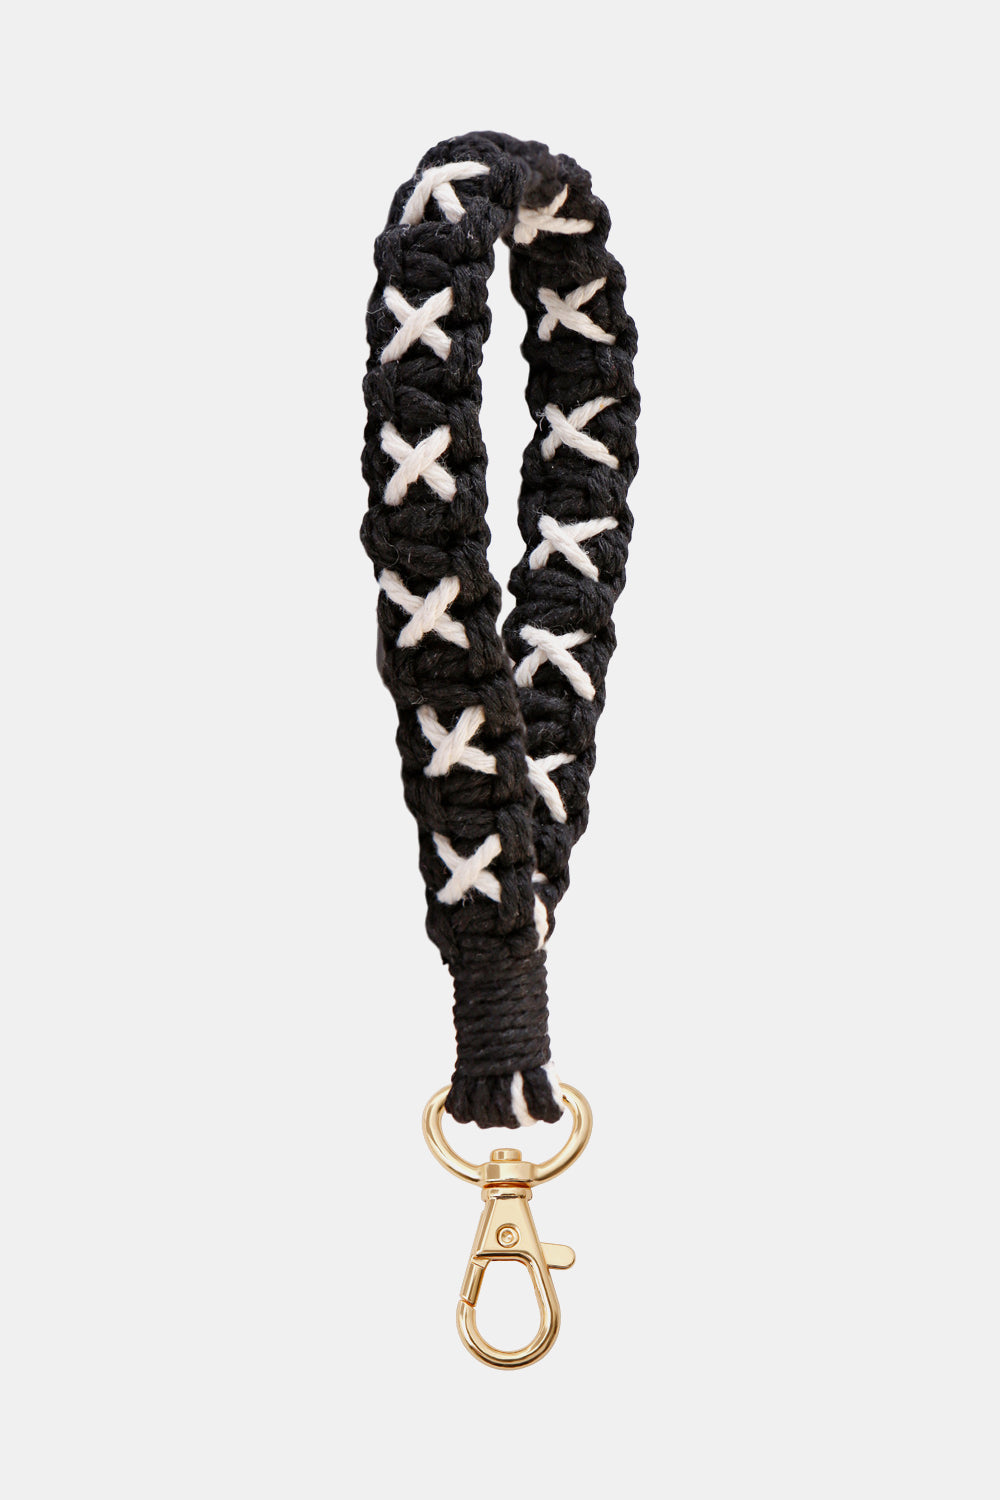 Contrast Macrame Key Chain - Spruced Roost